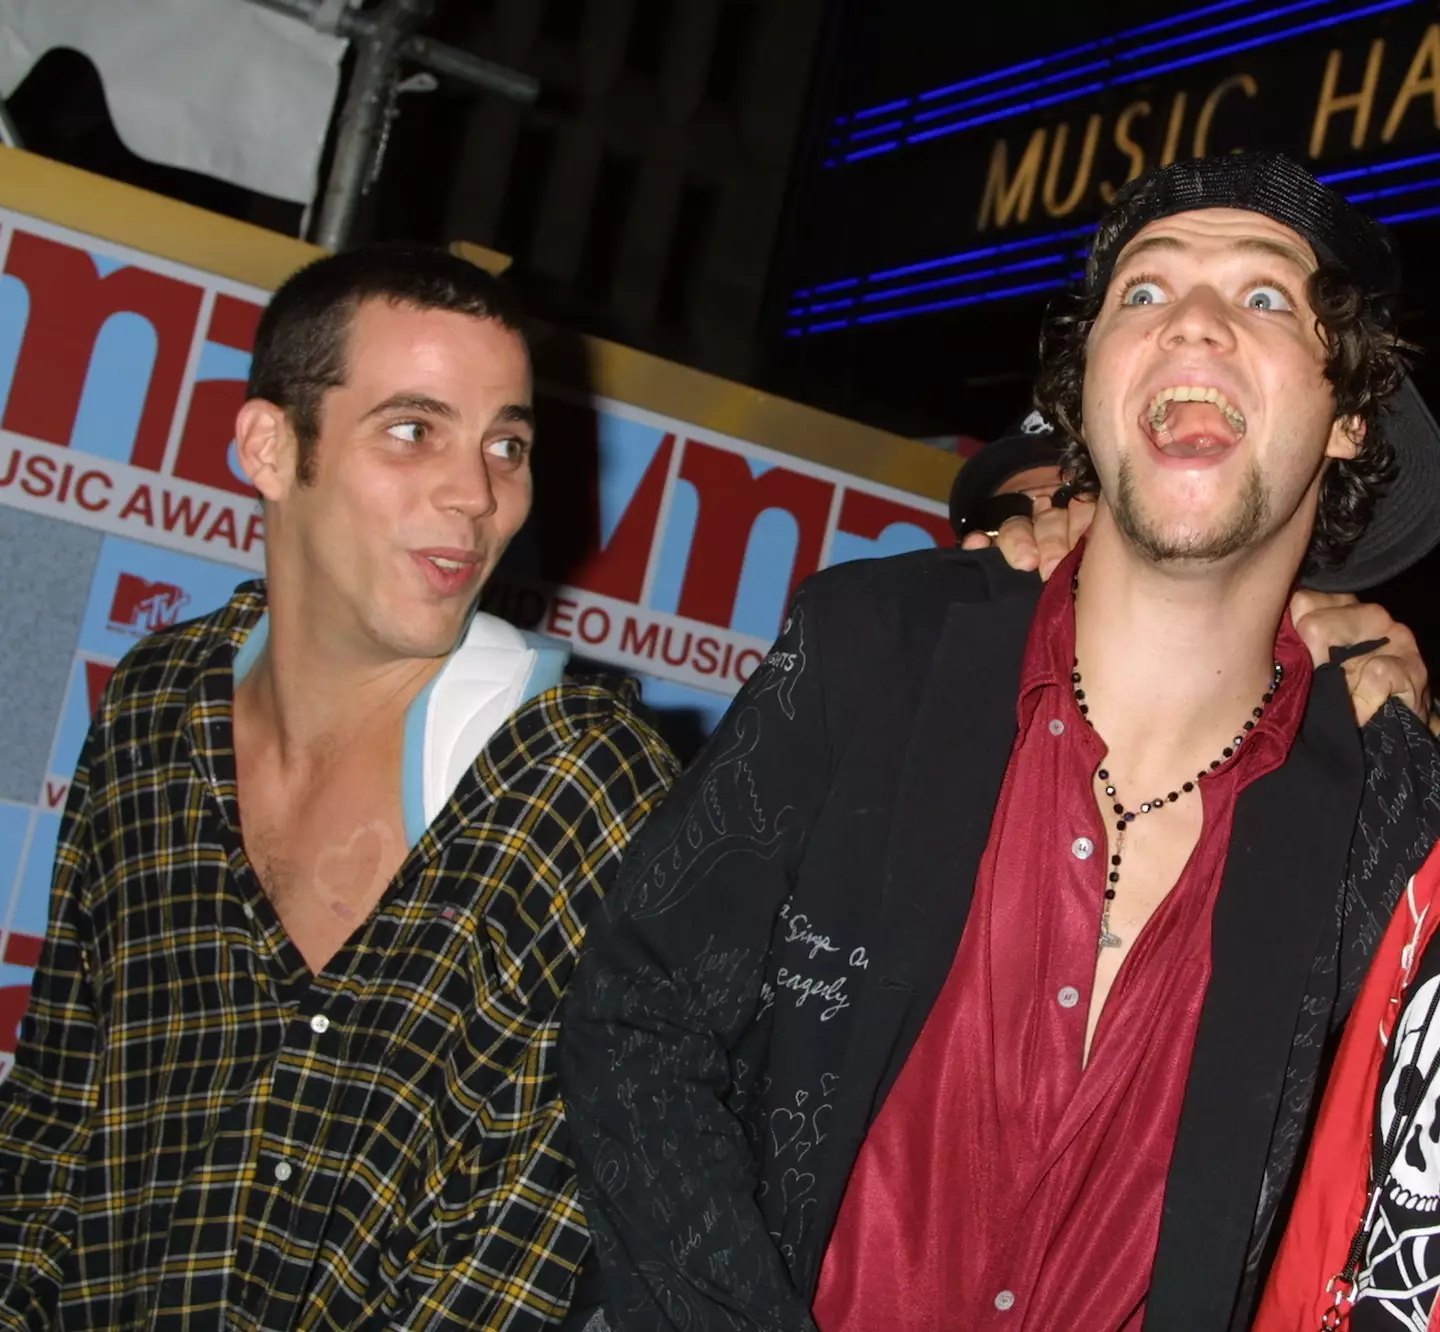 Steve-O has frankly addressed why Bam Margera wasn’t in Jackass Forever.